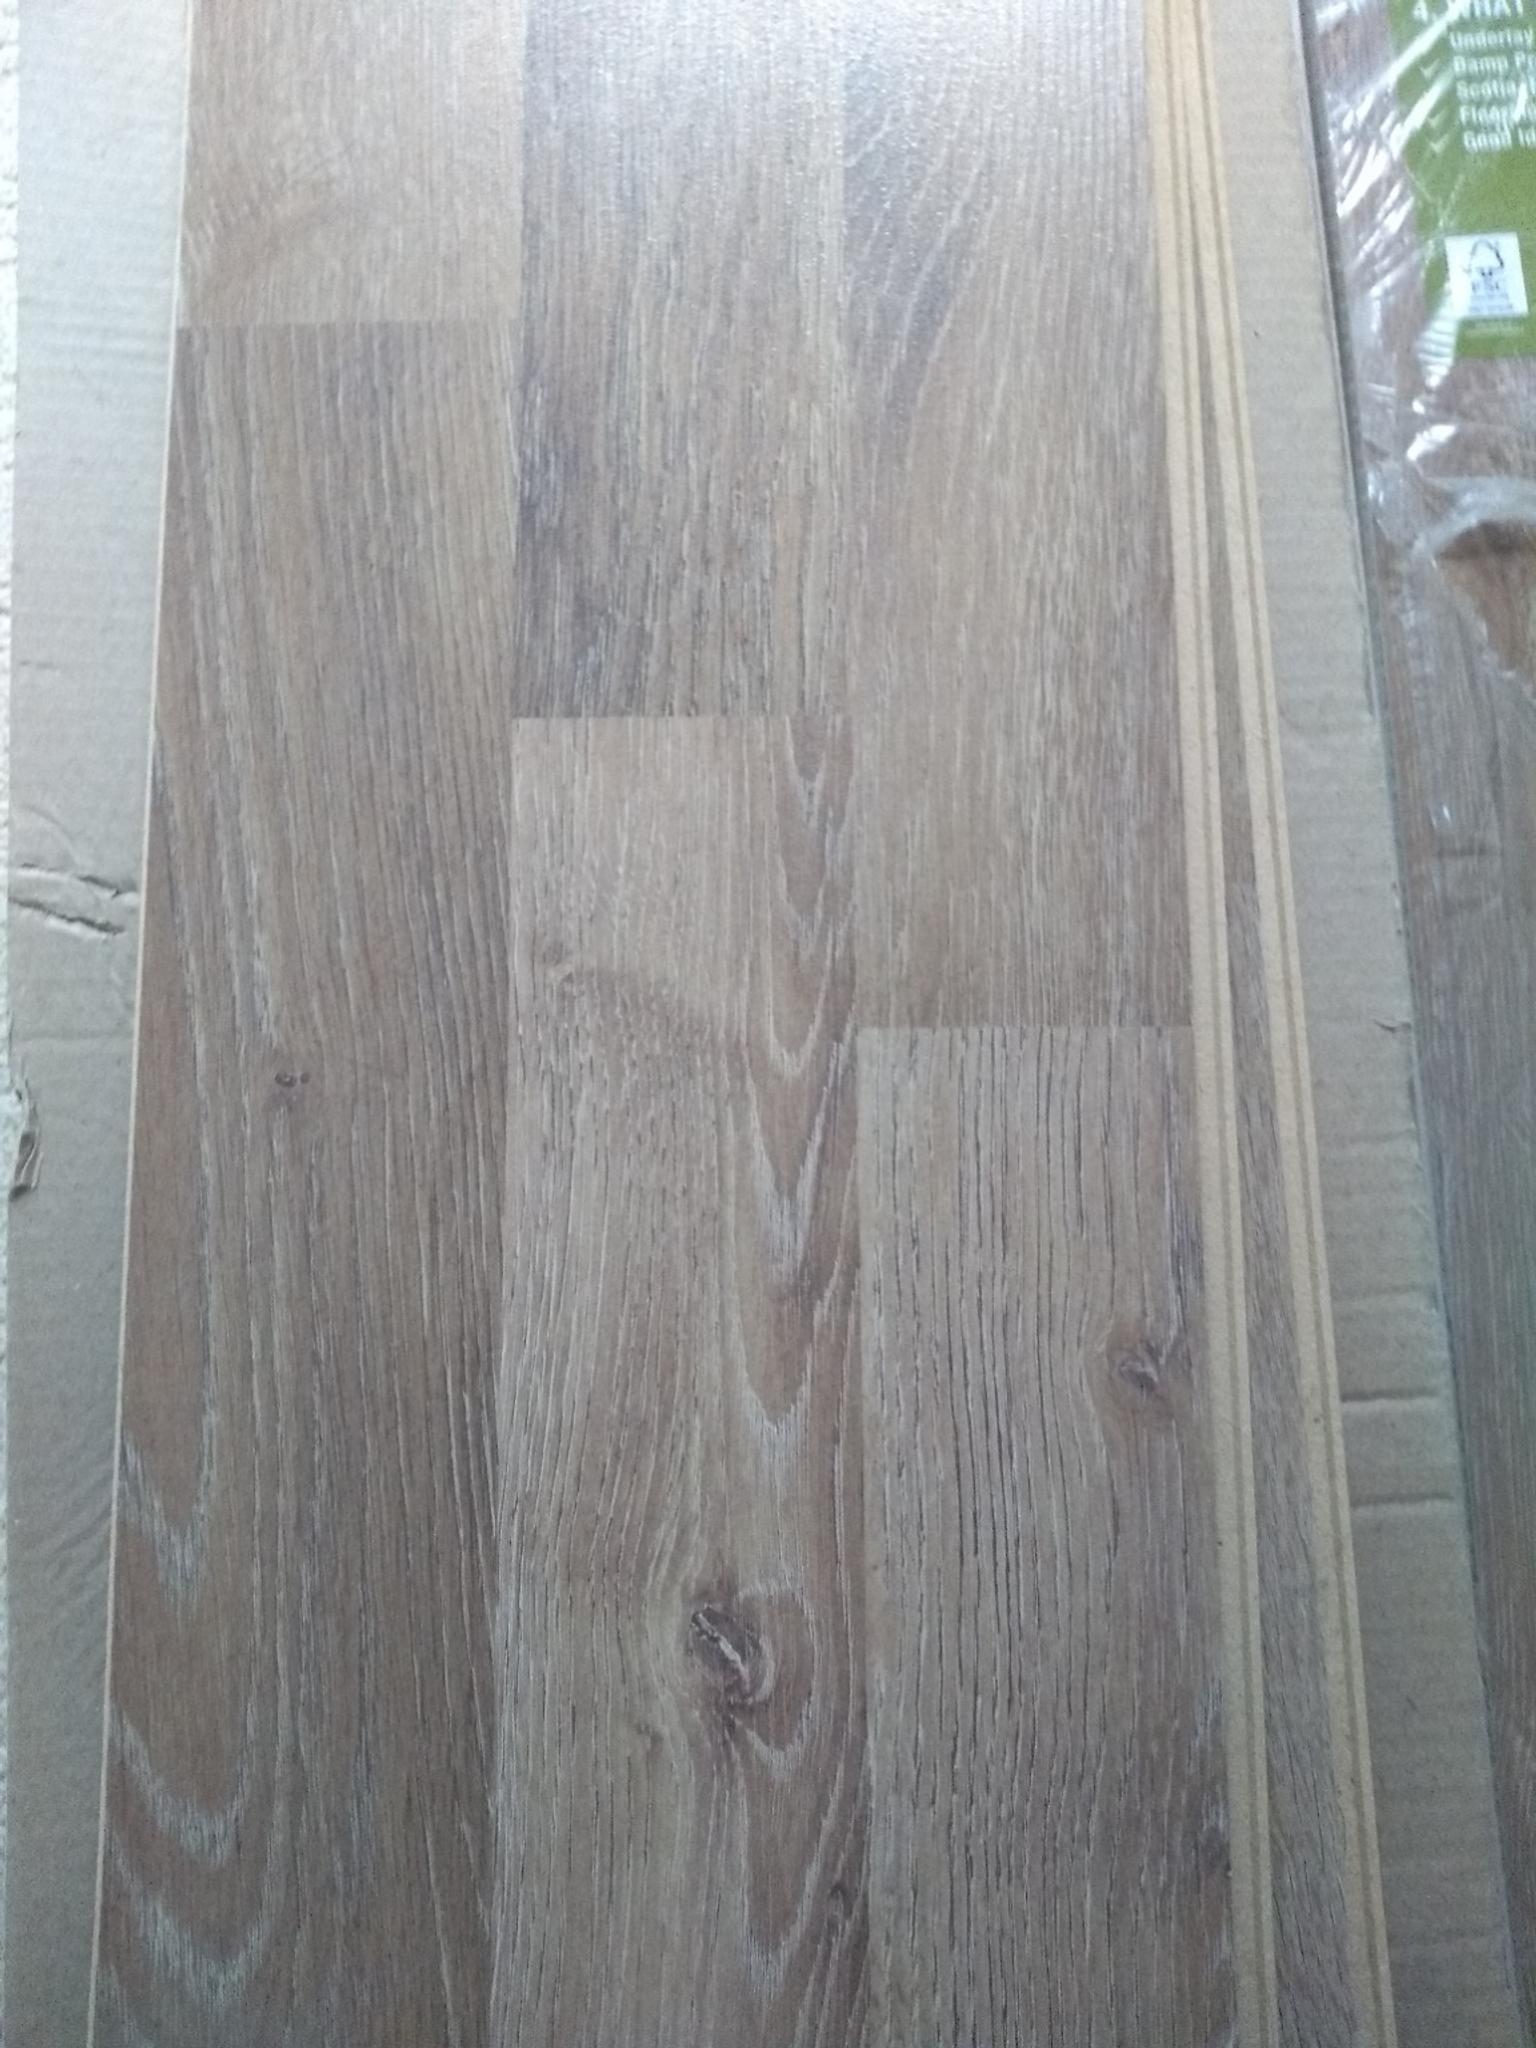 Wickes 12mm Laminate Flooring In B37 Solihull For 40 00 For Sale Shpock